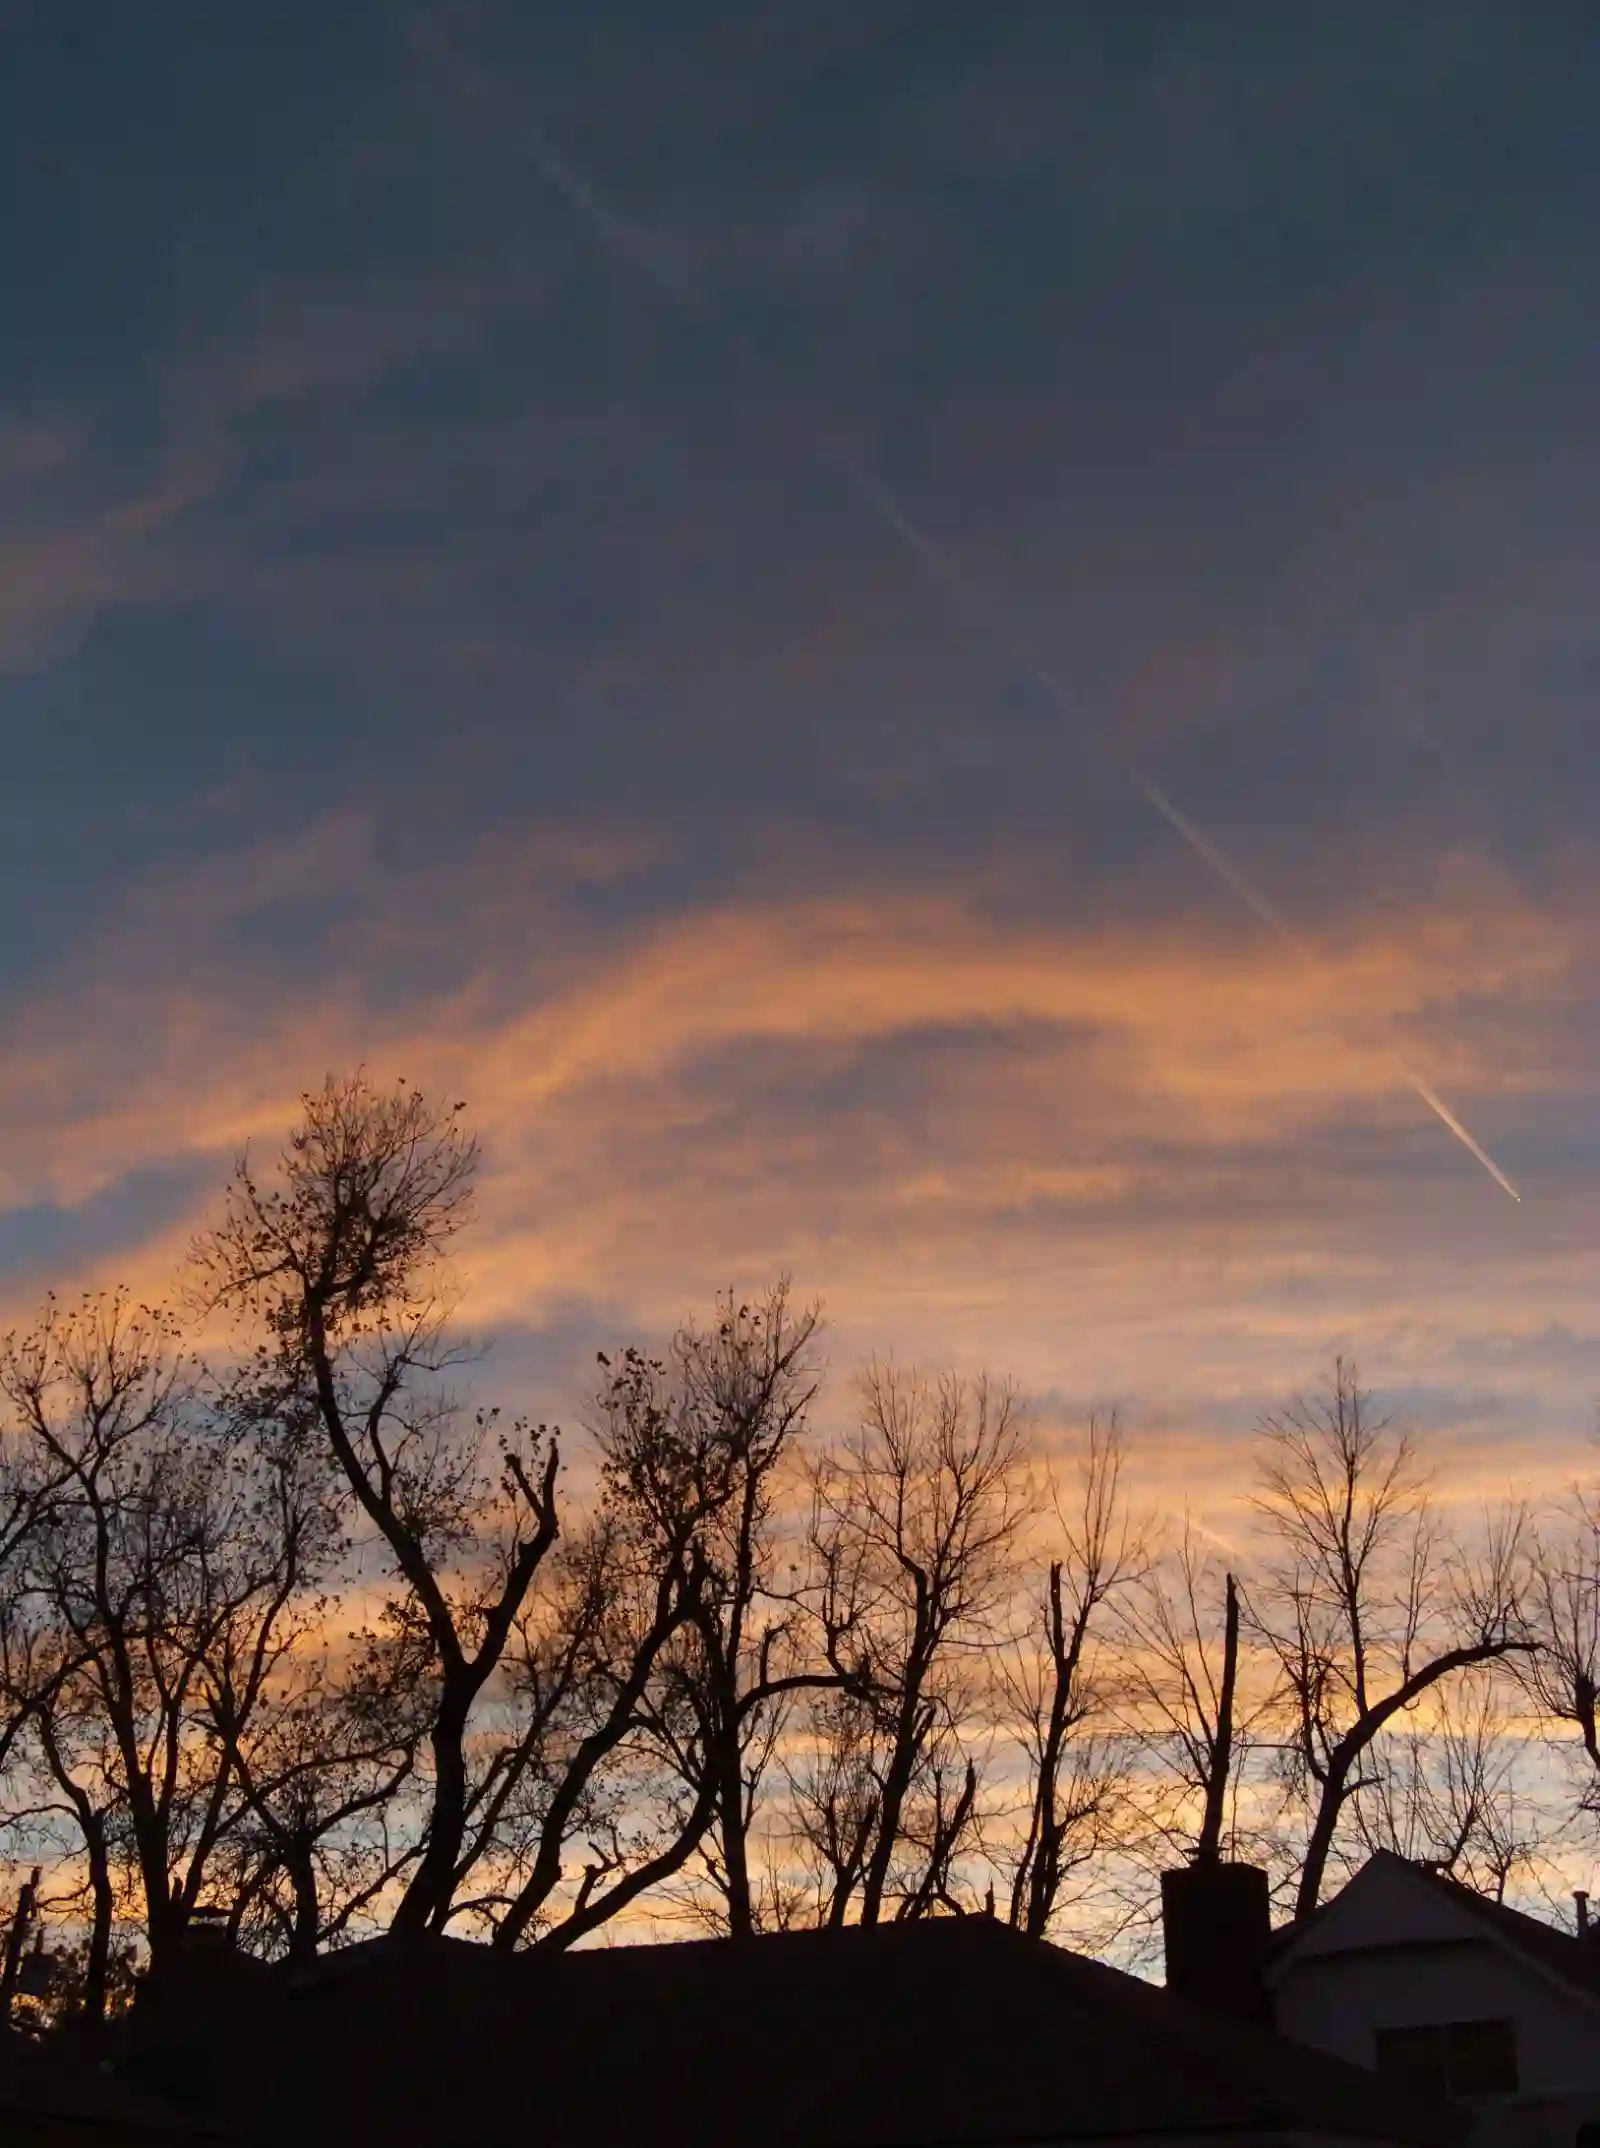 A rooftop and some trees silhouetted in the foreground of a cloudy sunset. An exhaust trail from a airliner bisects the sky.